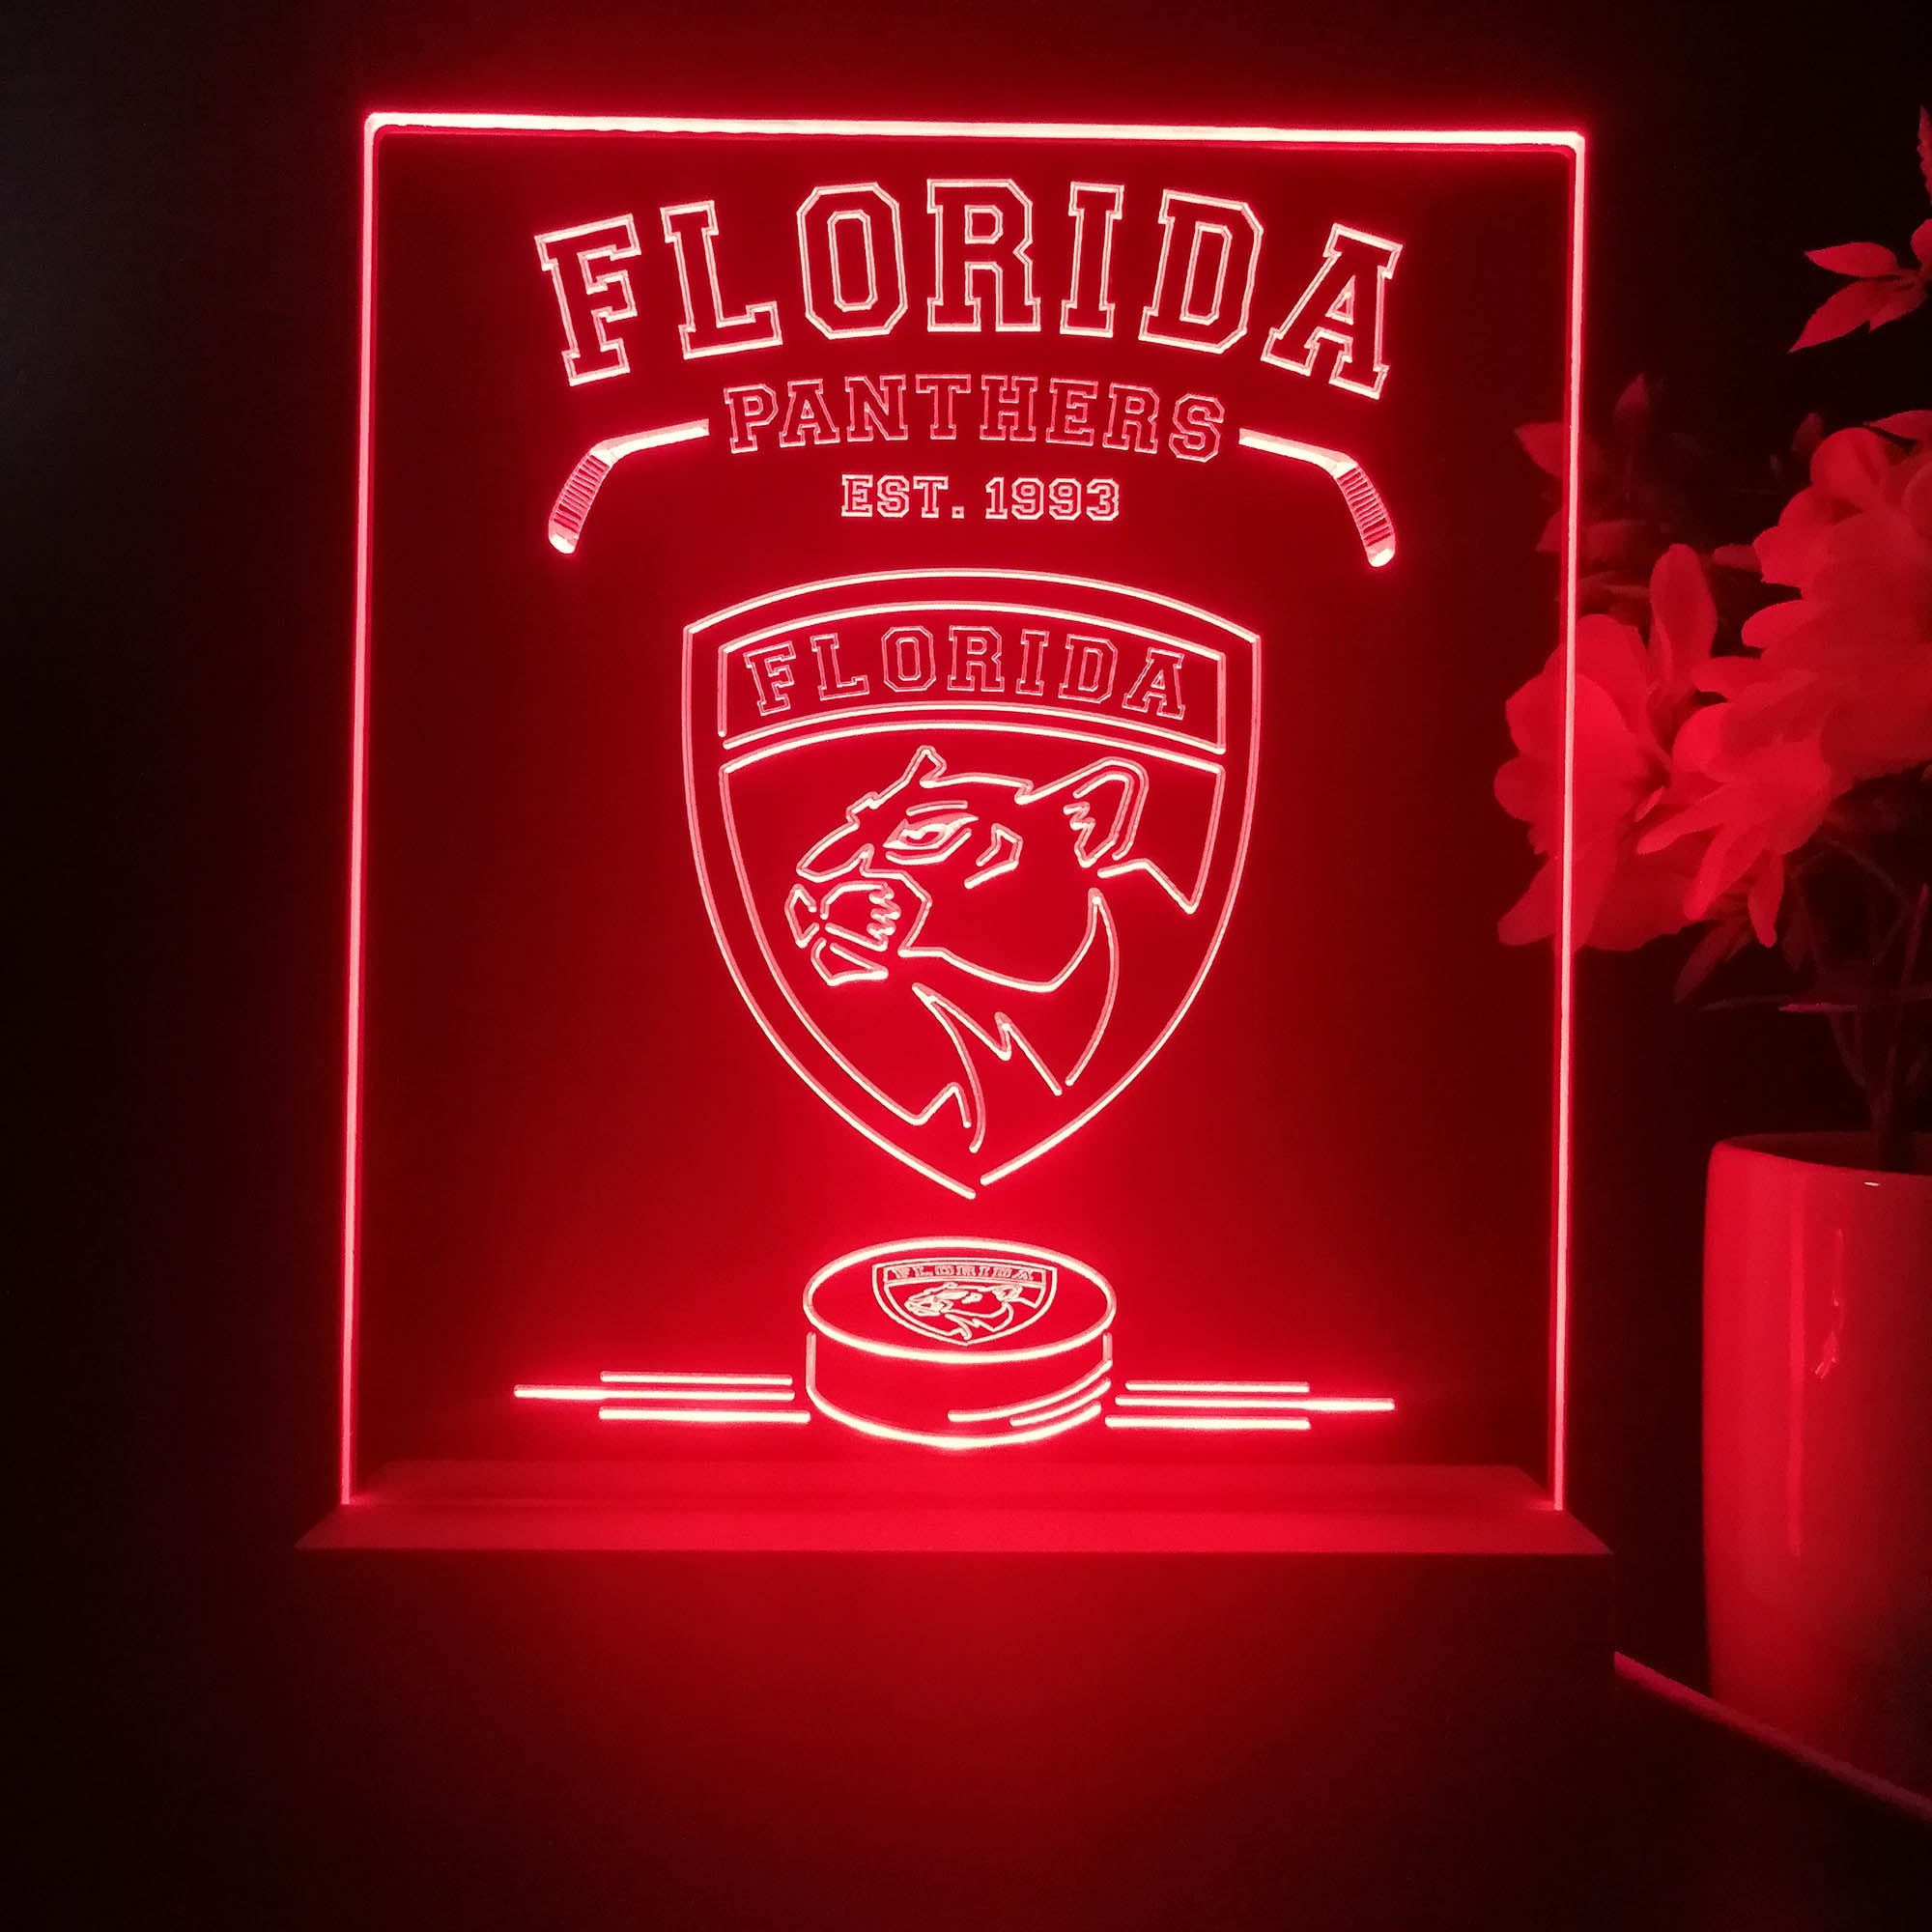 Personalized Florida Panthers Souvenir Neon LED Night Light Sign